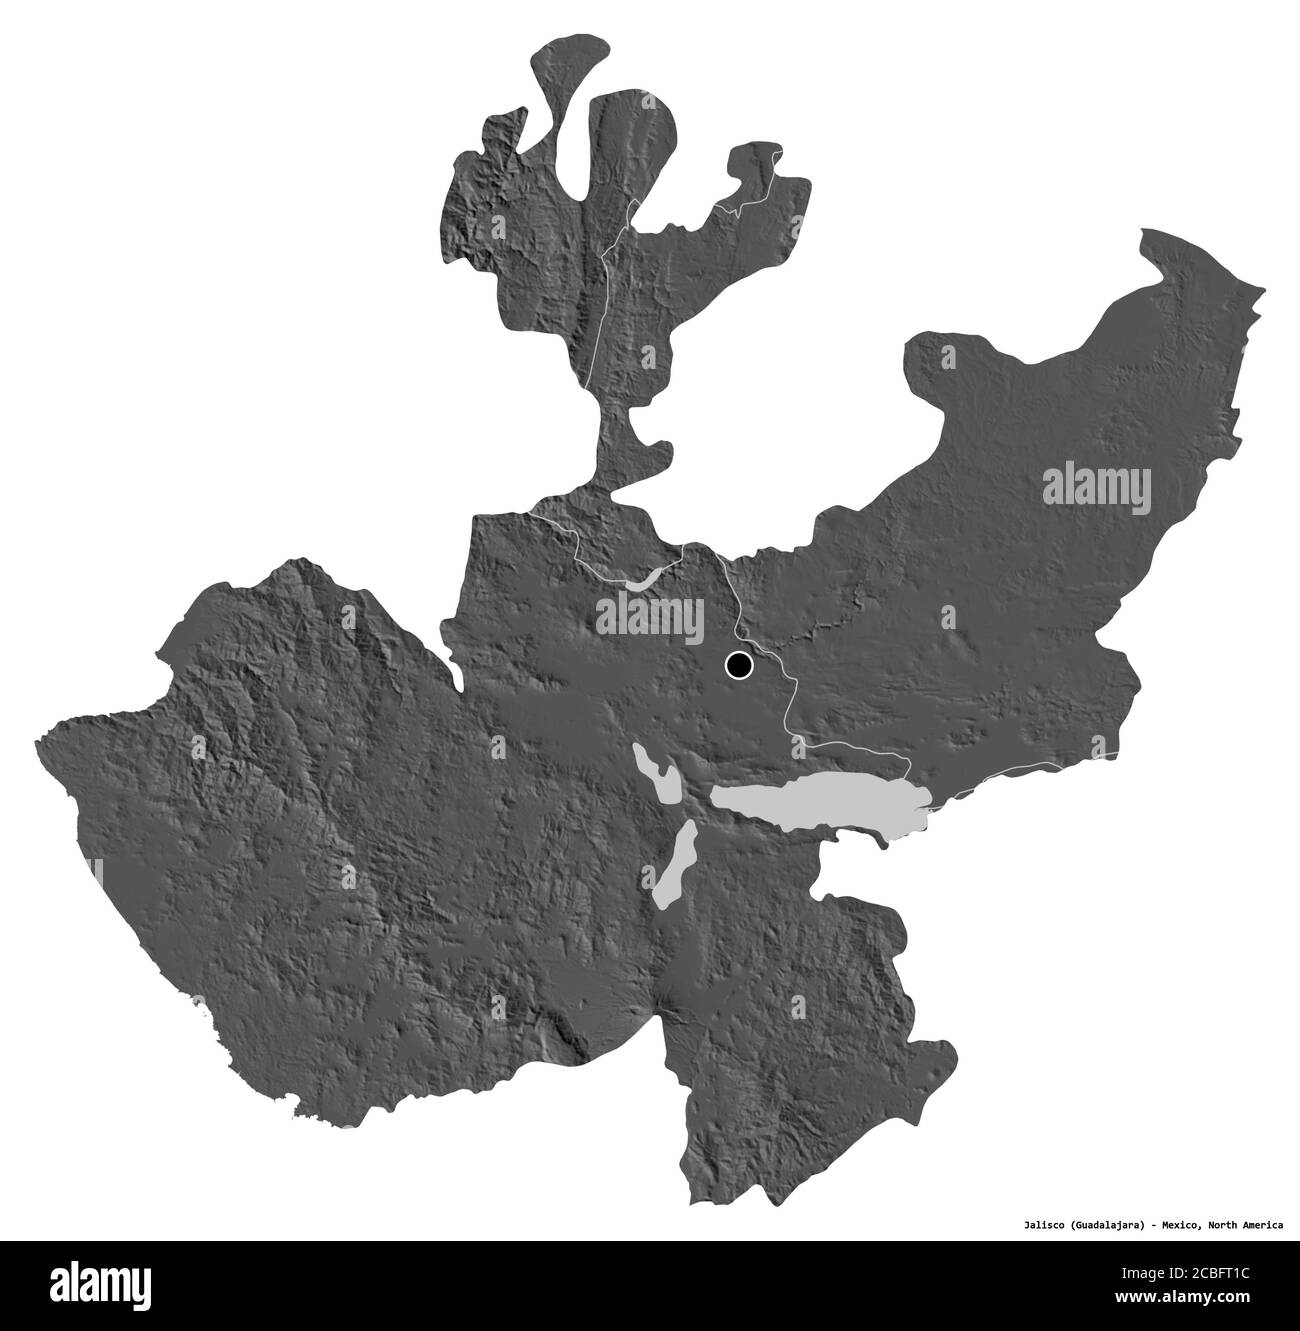 Shape of Jalisco, state of Mexico, with its capital isolated on white background. Bilevel elevation map. 3D rendering Stock Photo